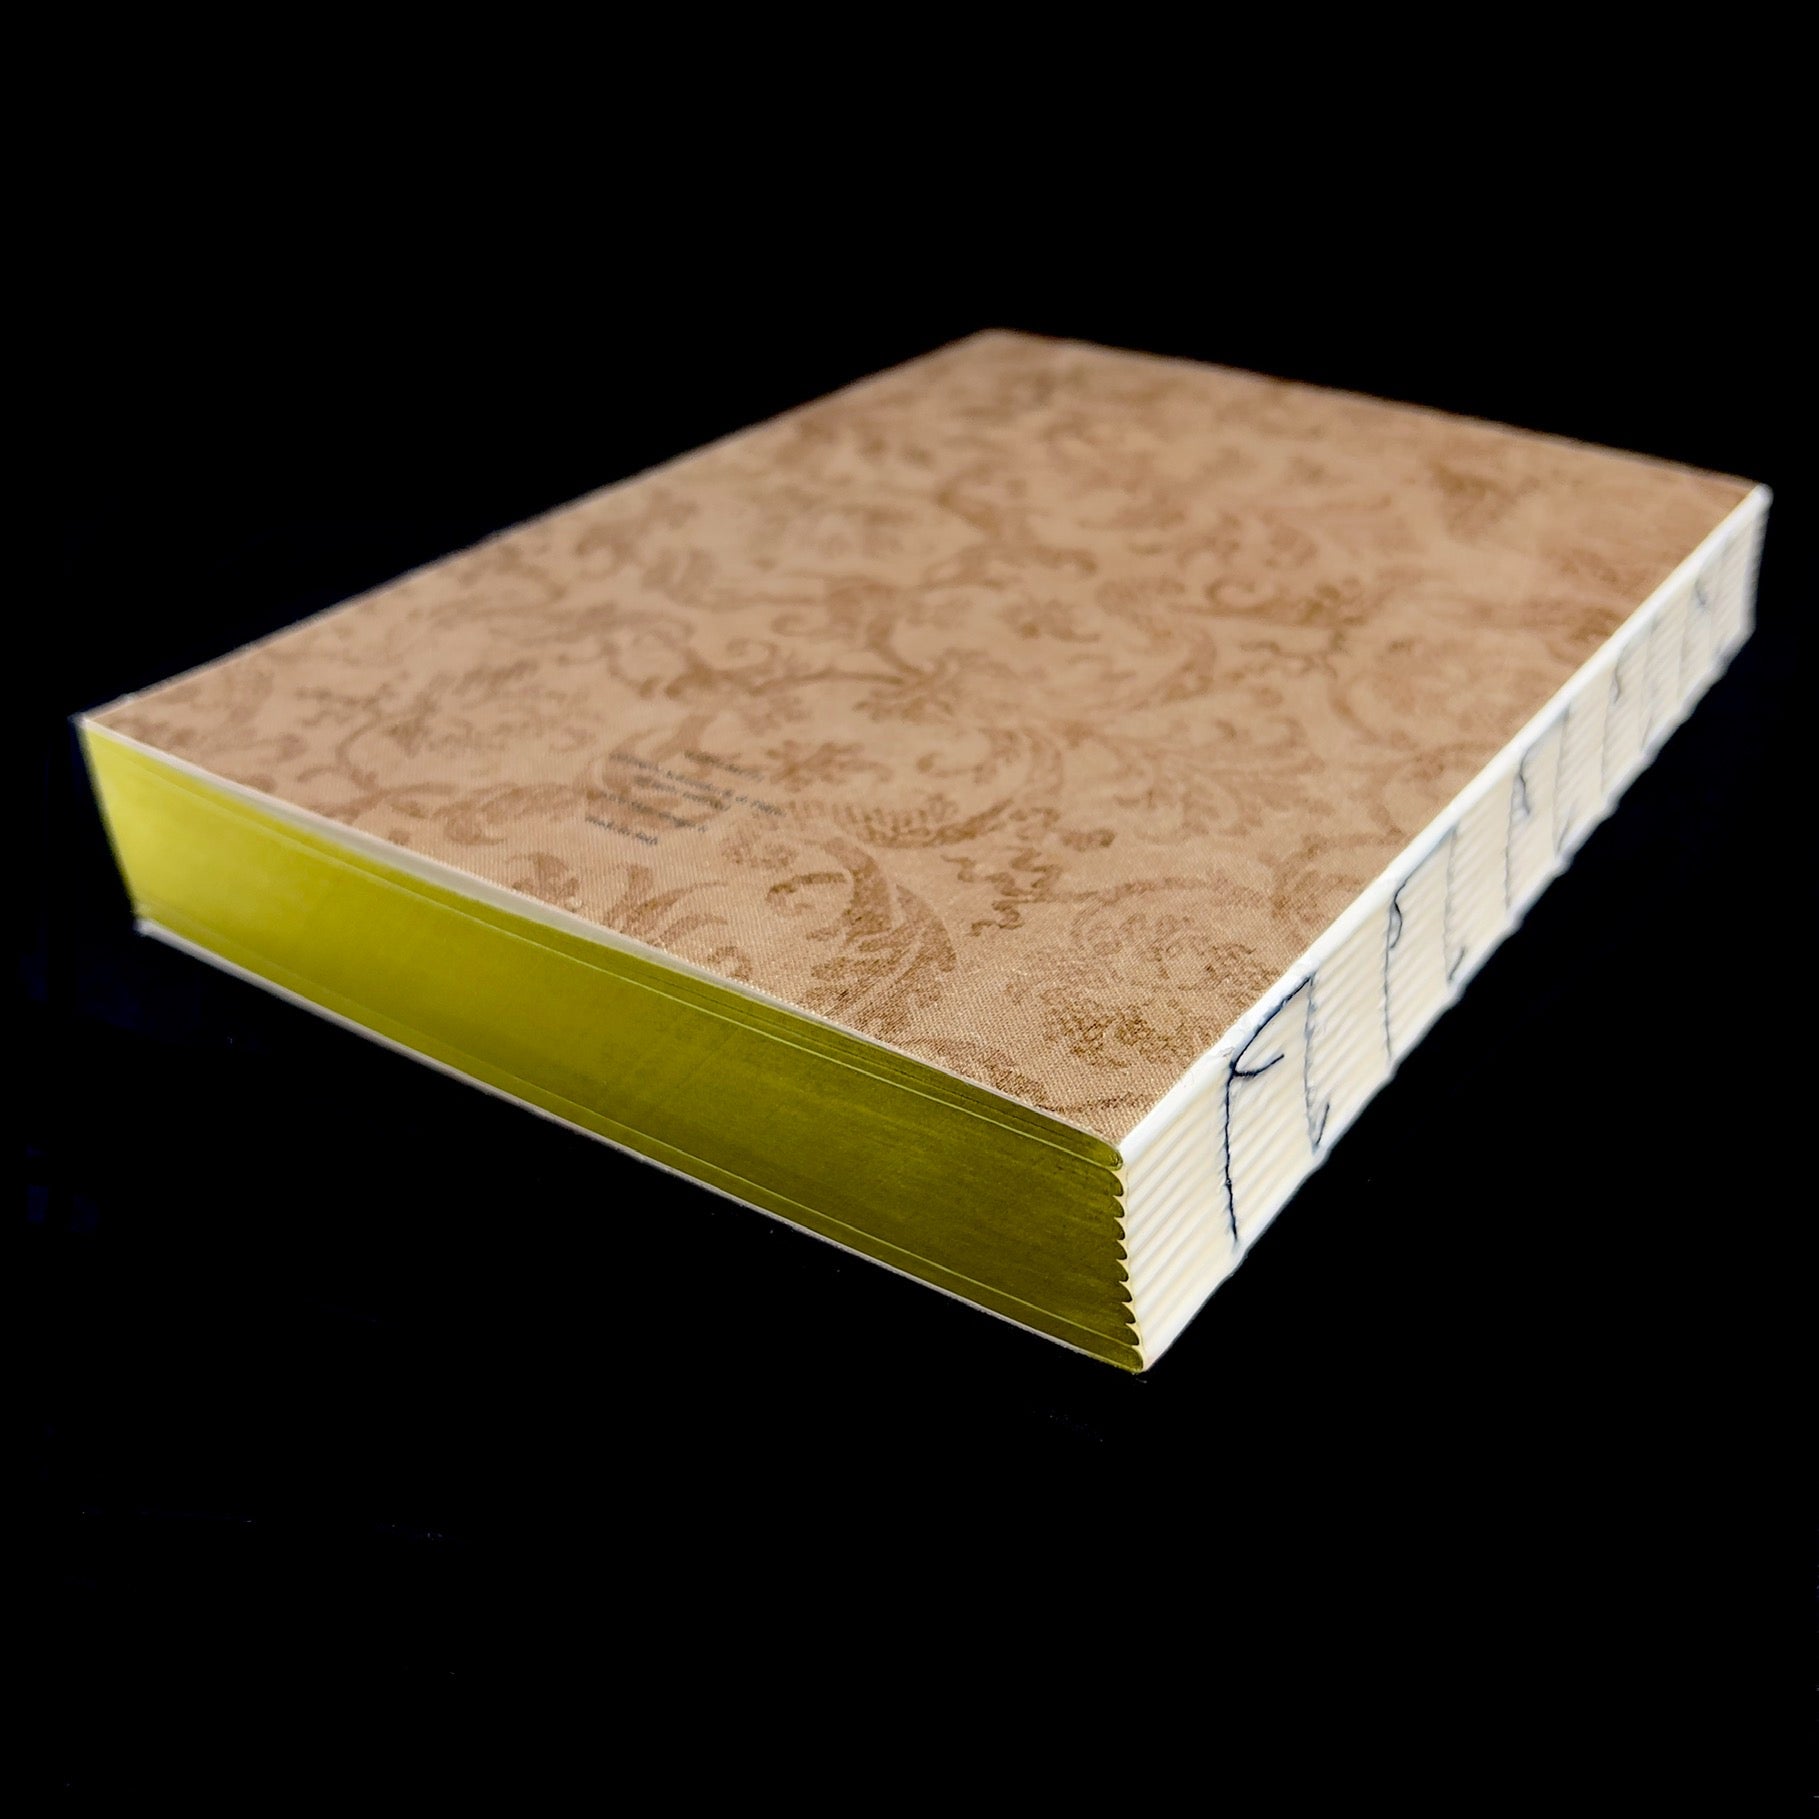 Side view of binding and colored pages of journal